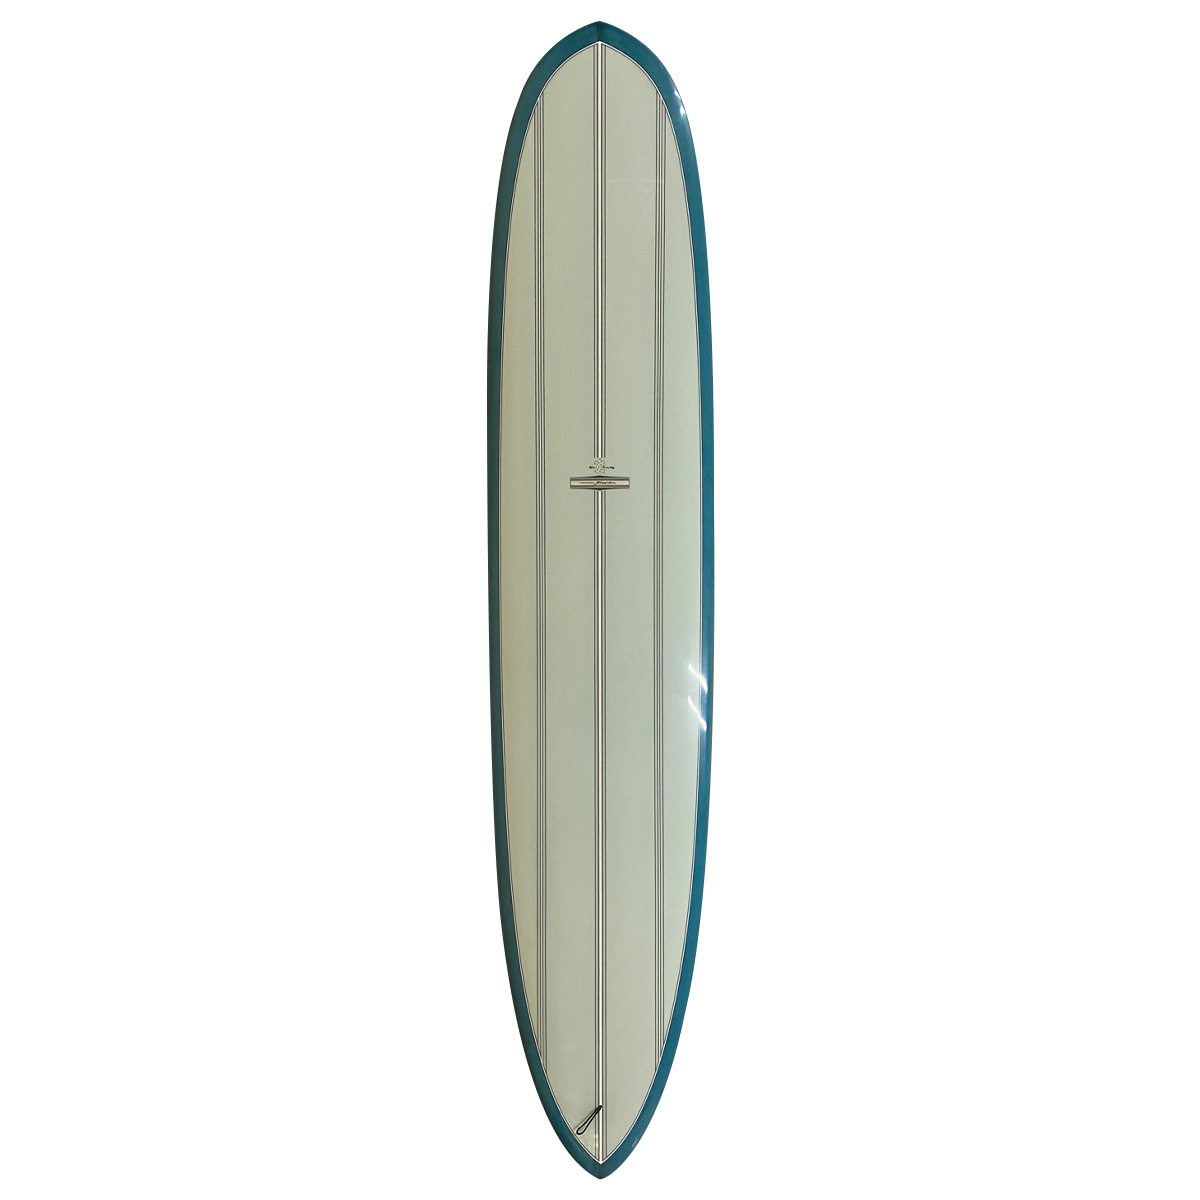 YU SURF CLASSIC / YU / ROUND PINTAIL NOSERIDER 9`6 by KEVIN CONNELLY